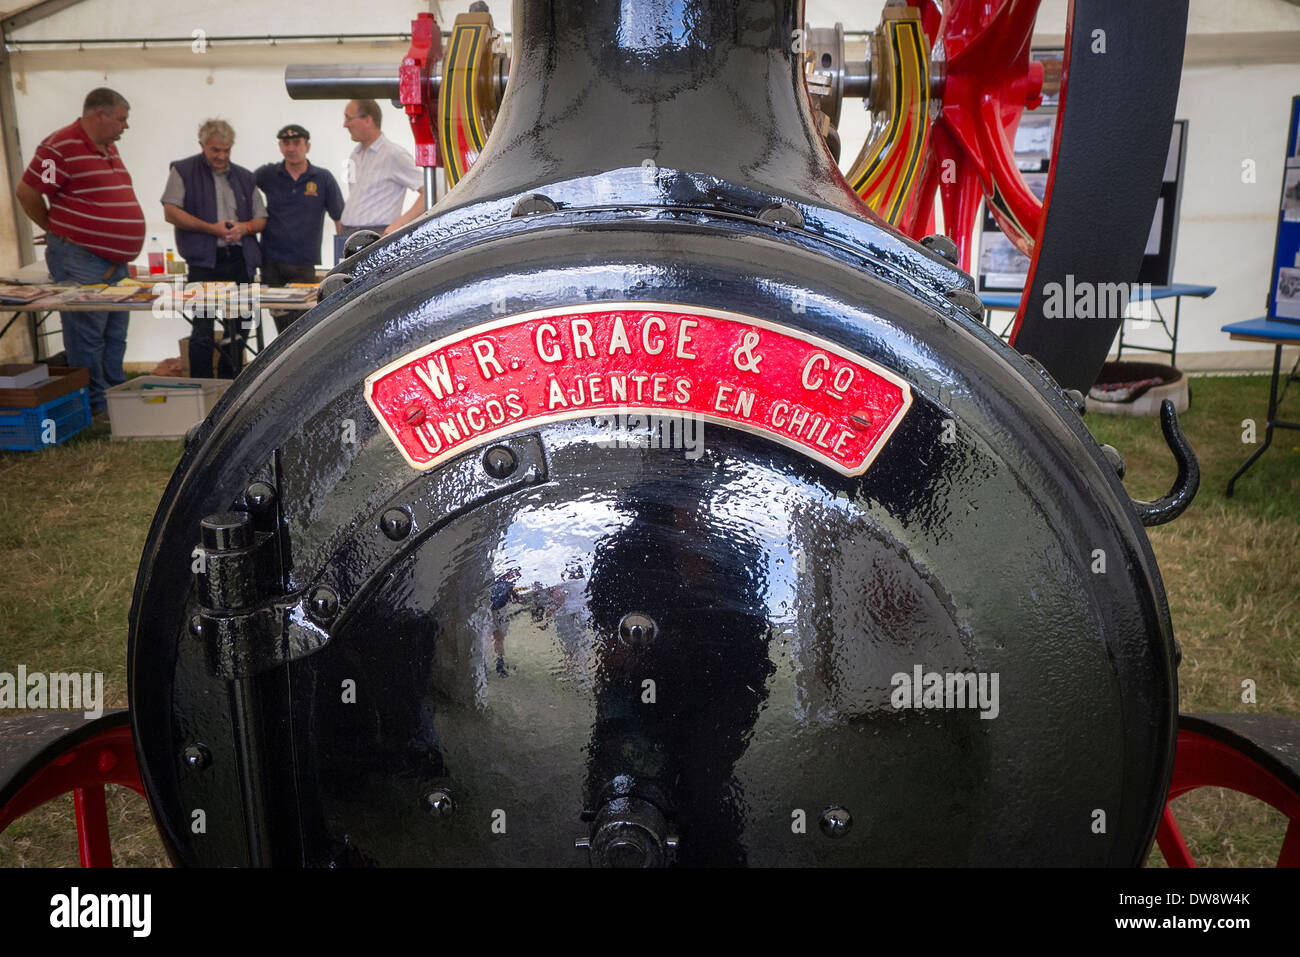 Front of old 1900s British steam engine with importer's name plate in Chile Stock Photo